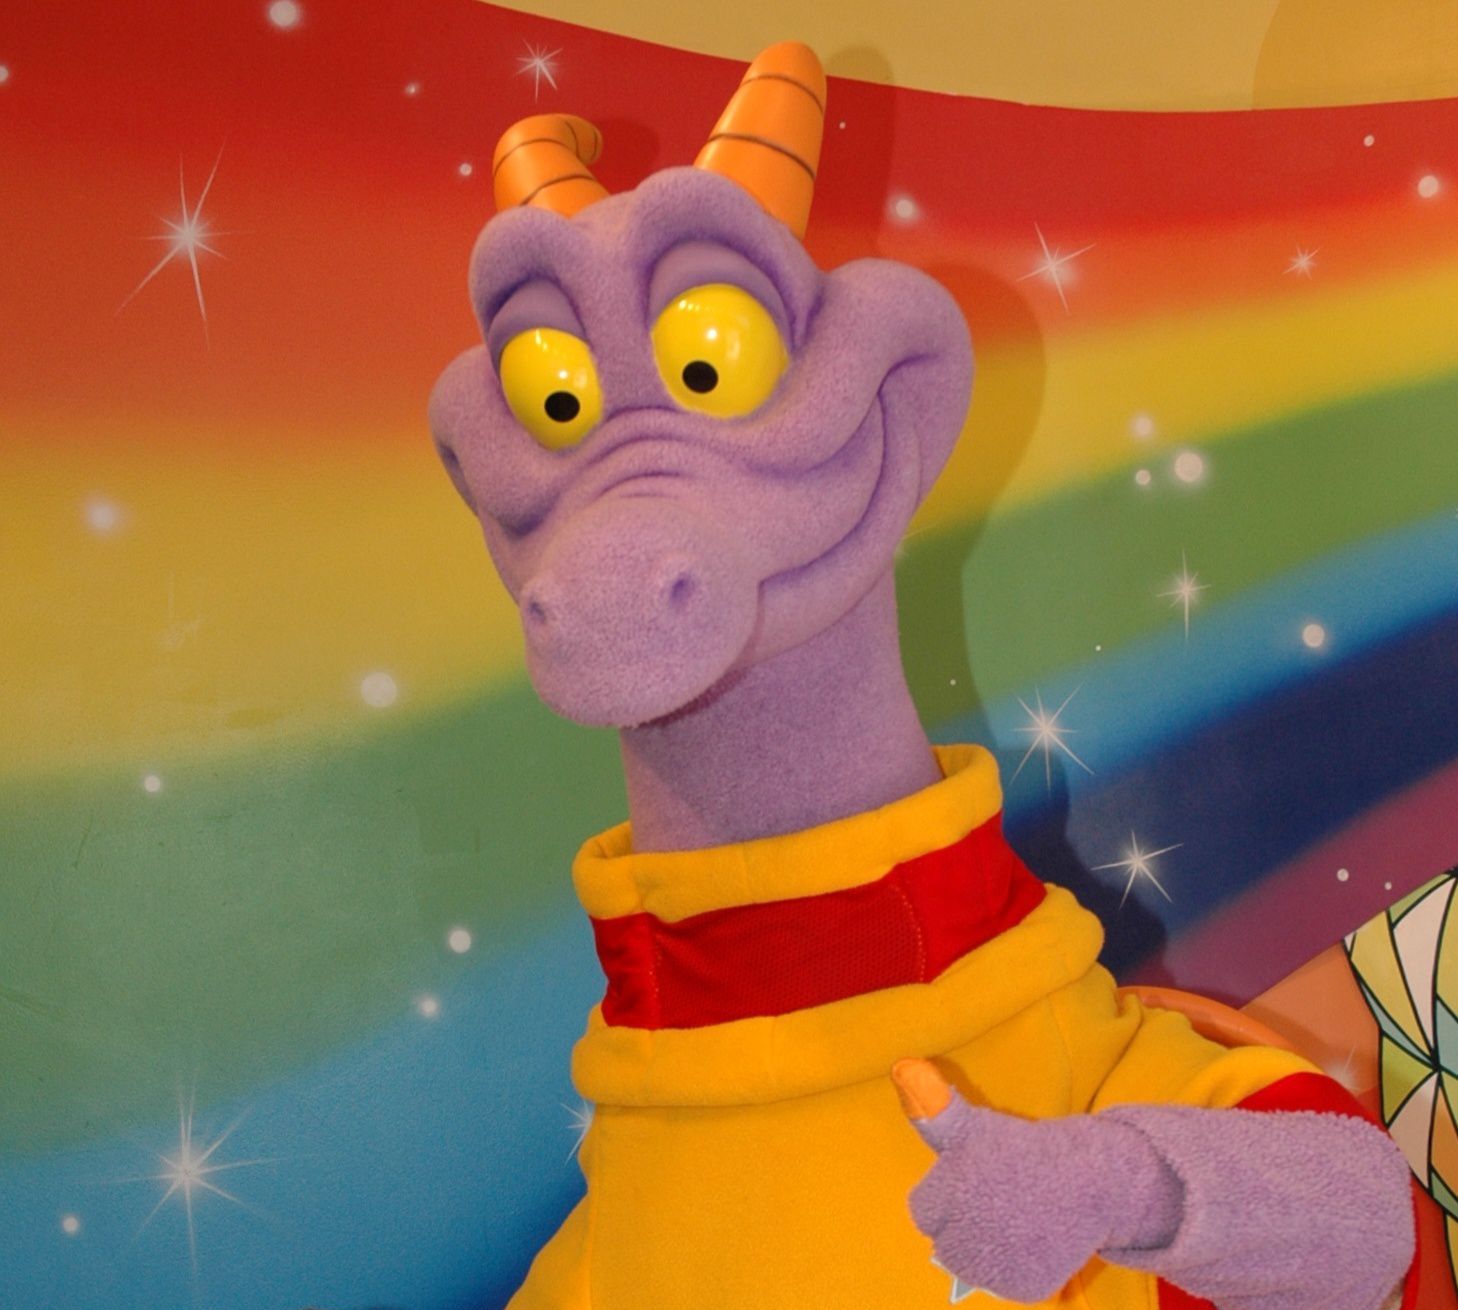 Albums 94+ Images journey into imagination with figment photos Full HD, 2k, 4k